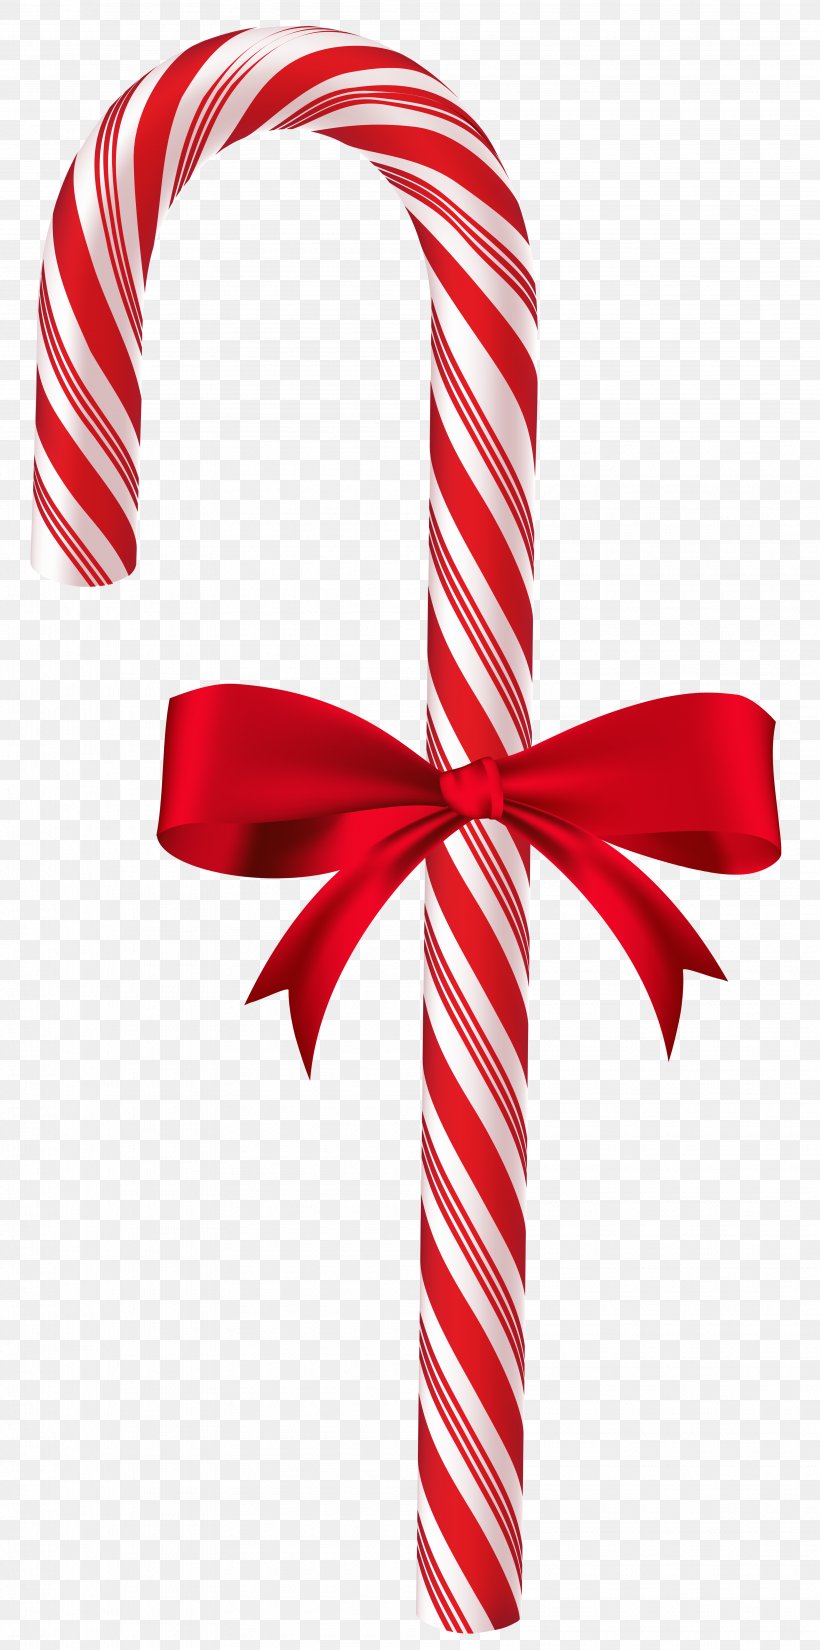 Candy Cane Lollipop Clip Art, PNG, 3775x7600px, Candy Cane, Candy, Cane, Christmas, Lollipop Download Free